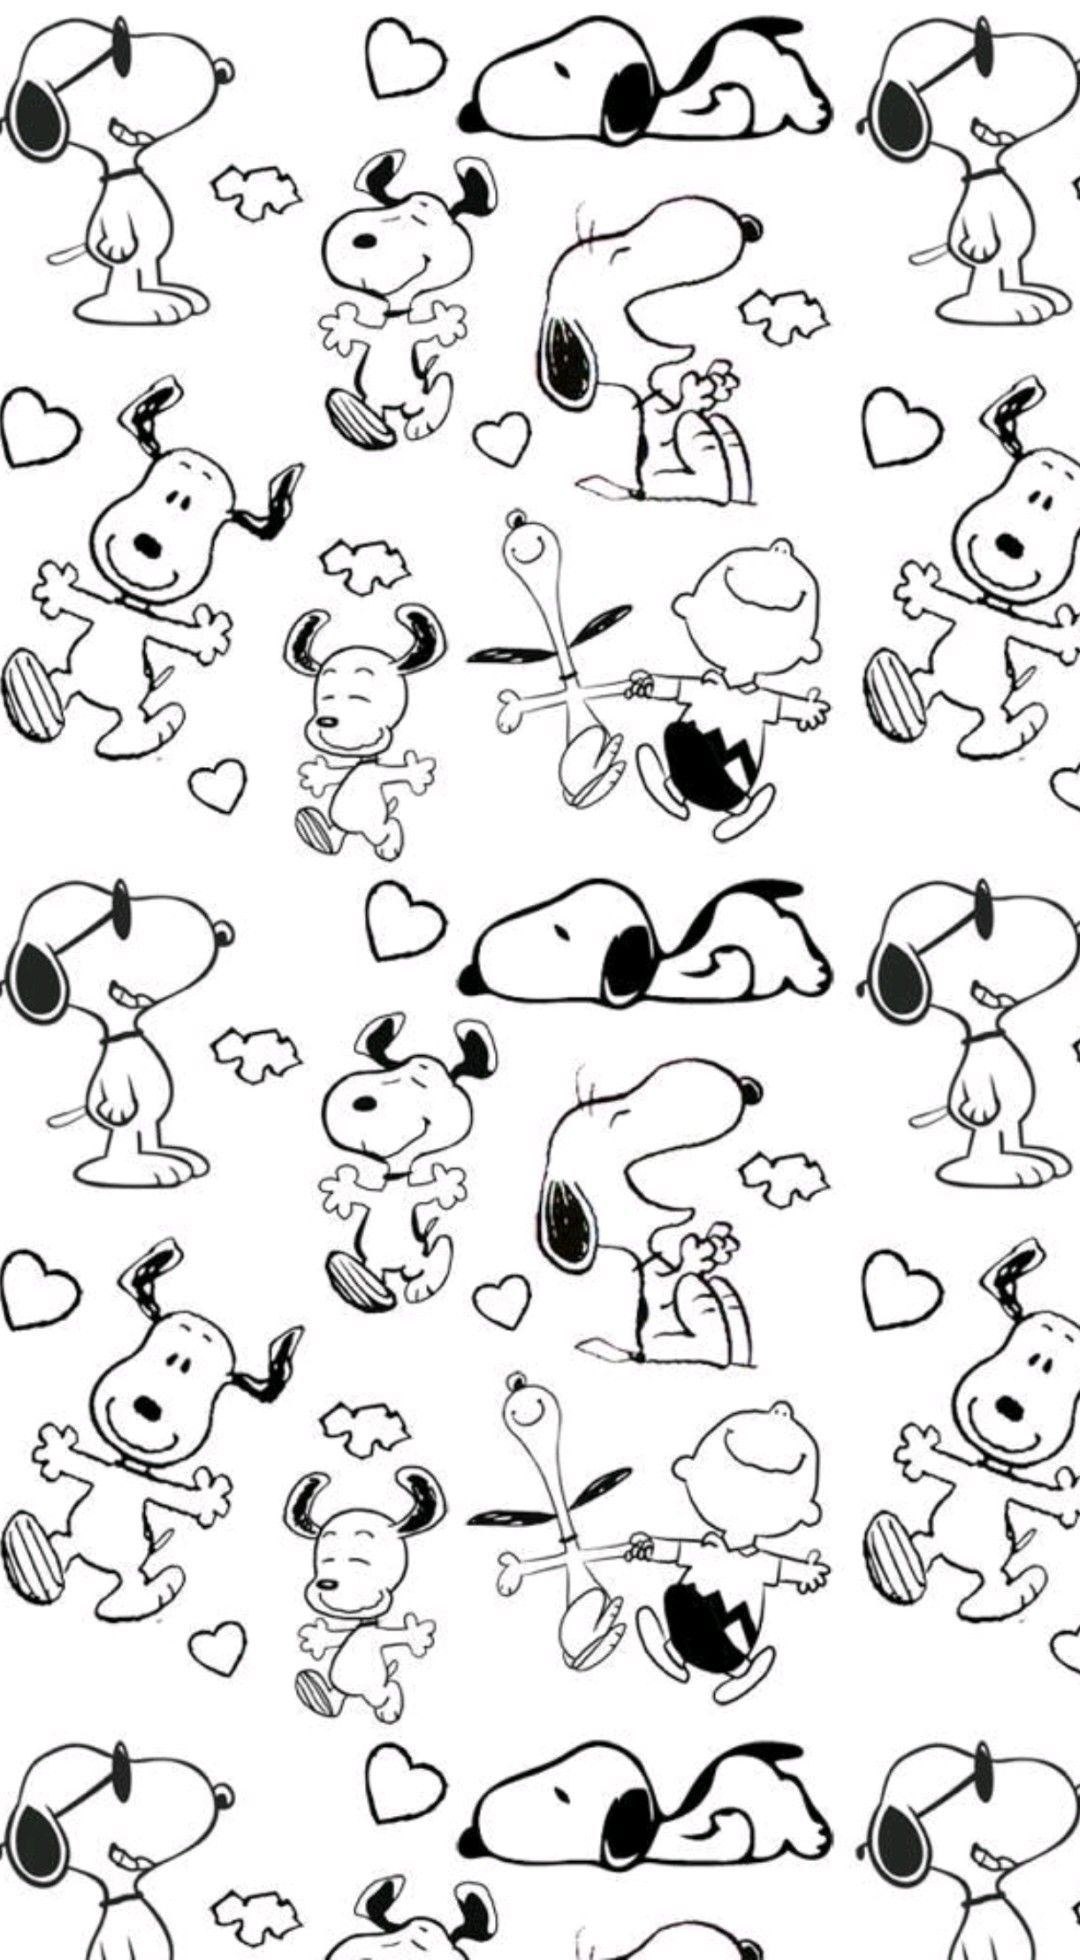 1080x1960 Pin by Diana Morales on wallpaper | Snoopy wallpaper, Iphone wallpaper images, Disney wallpaper